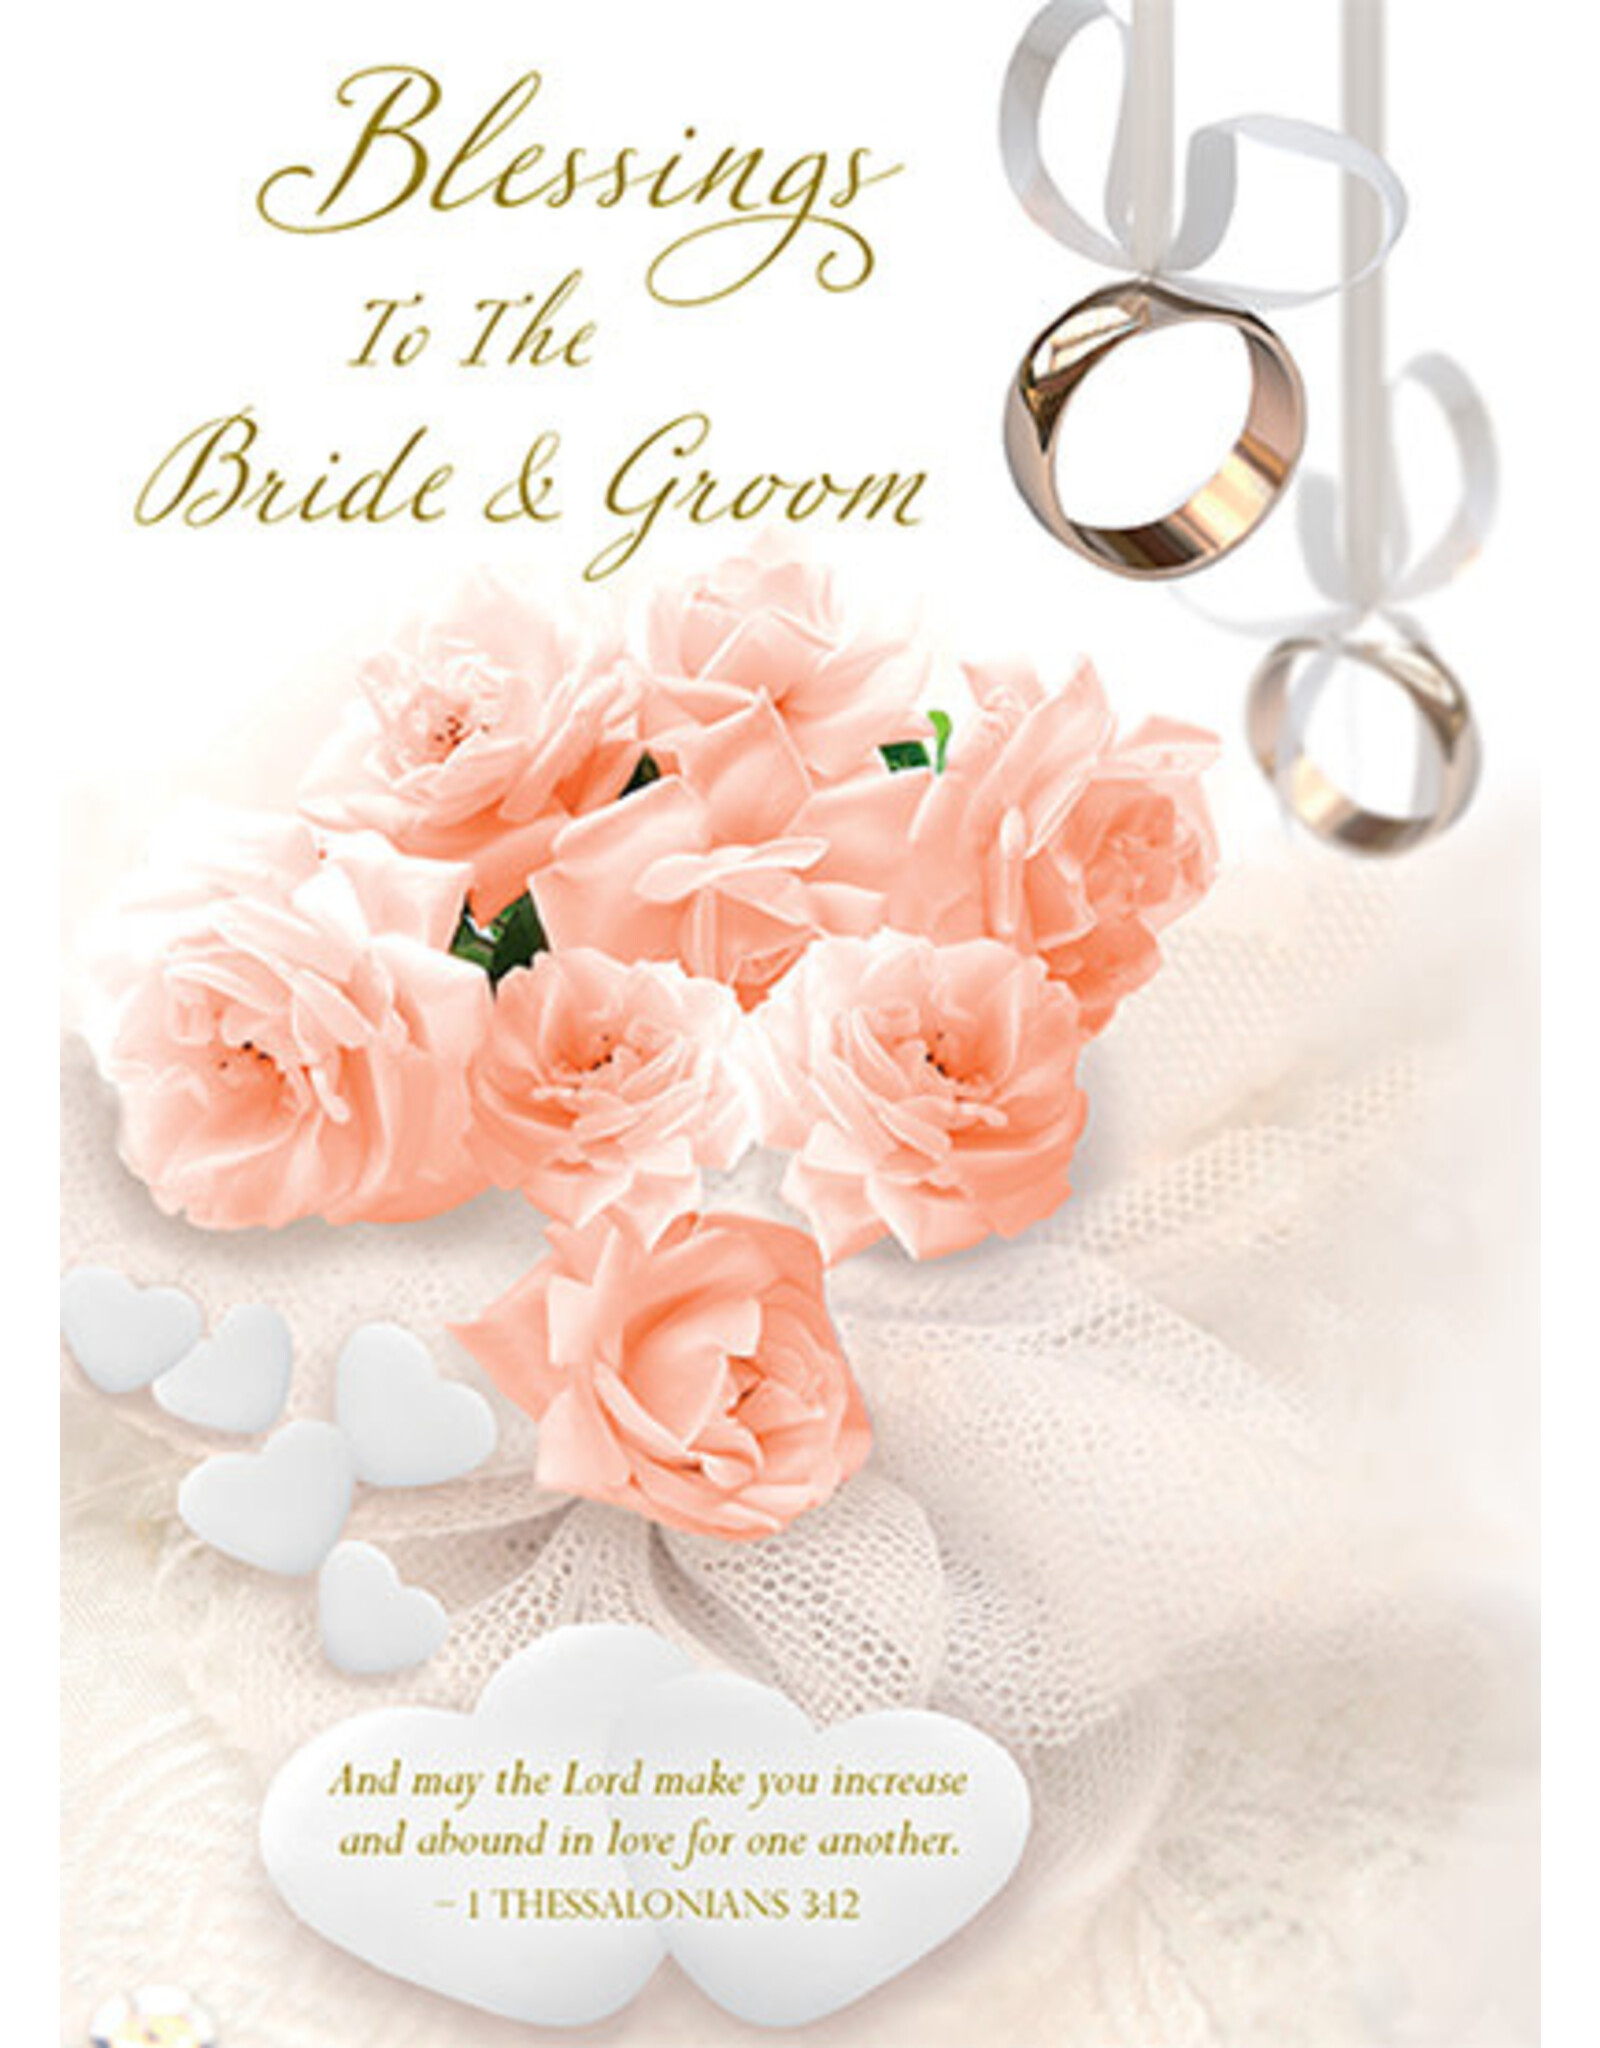 Greetings of Faith Wedding Card - Blessings to the Bride & Groom